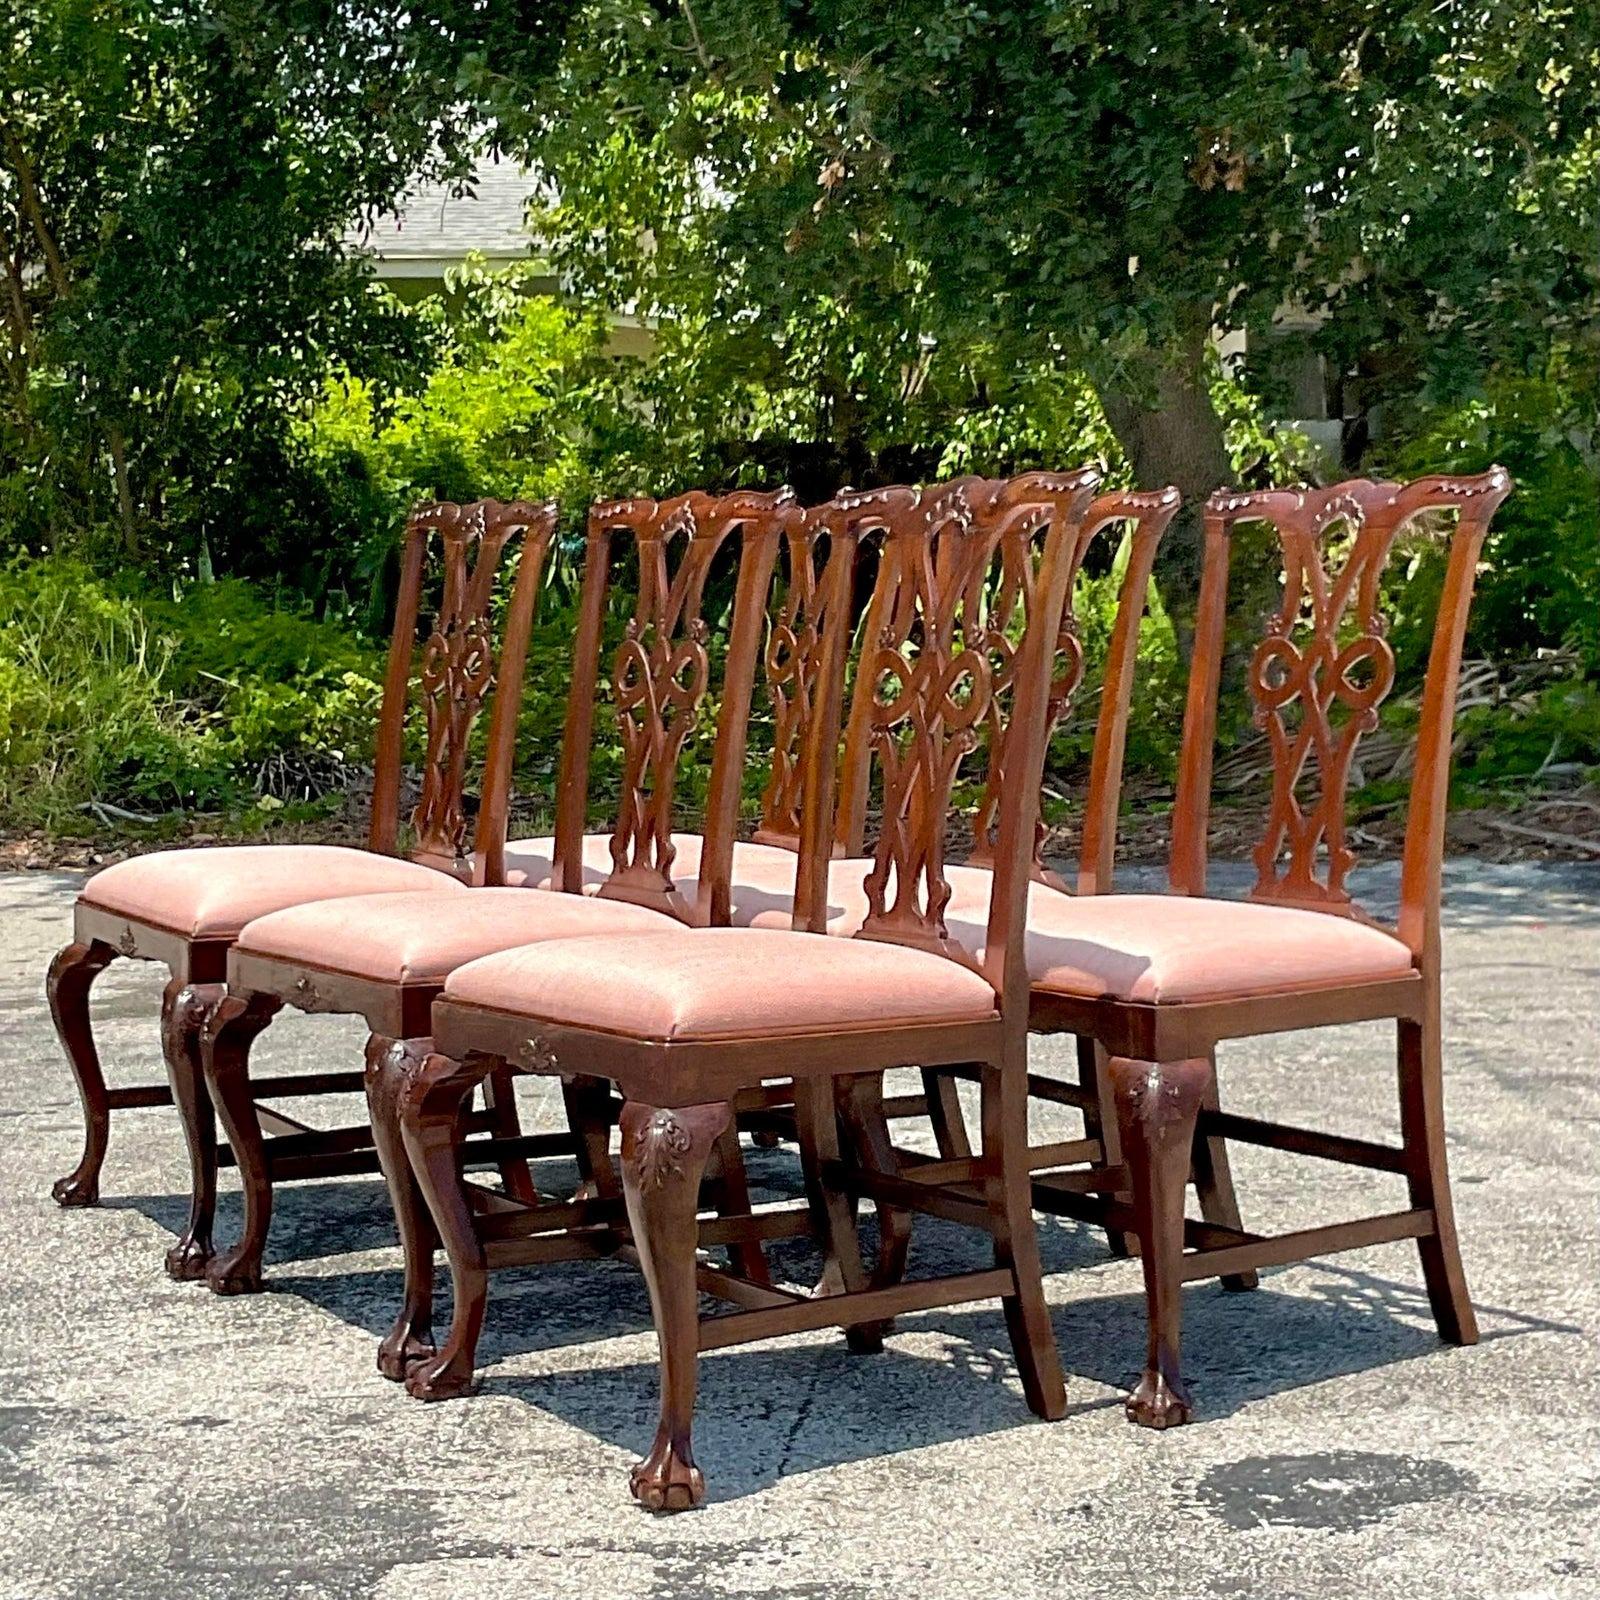 Vintage Regency Carved Ruffle Dining Chairs - Set of 6 For Sale 2